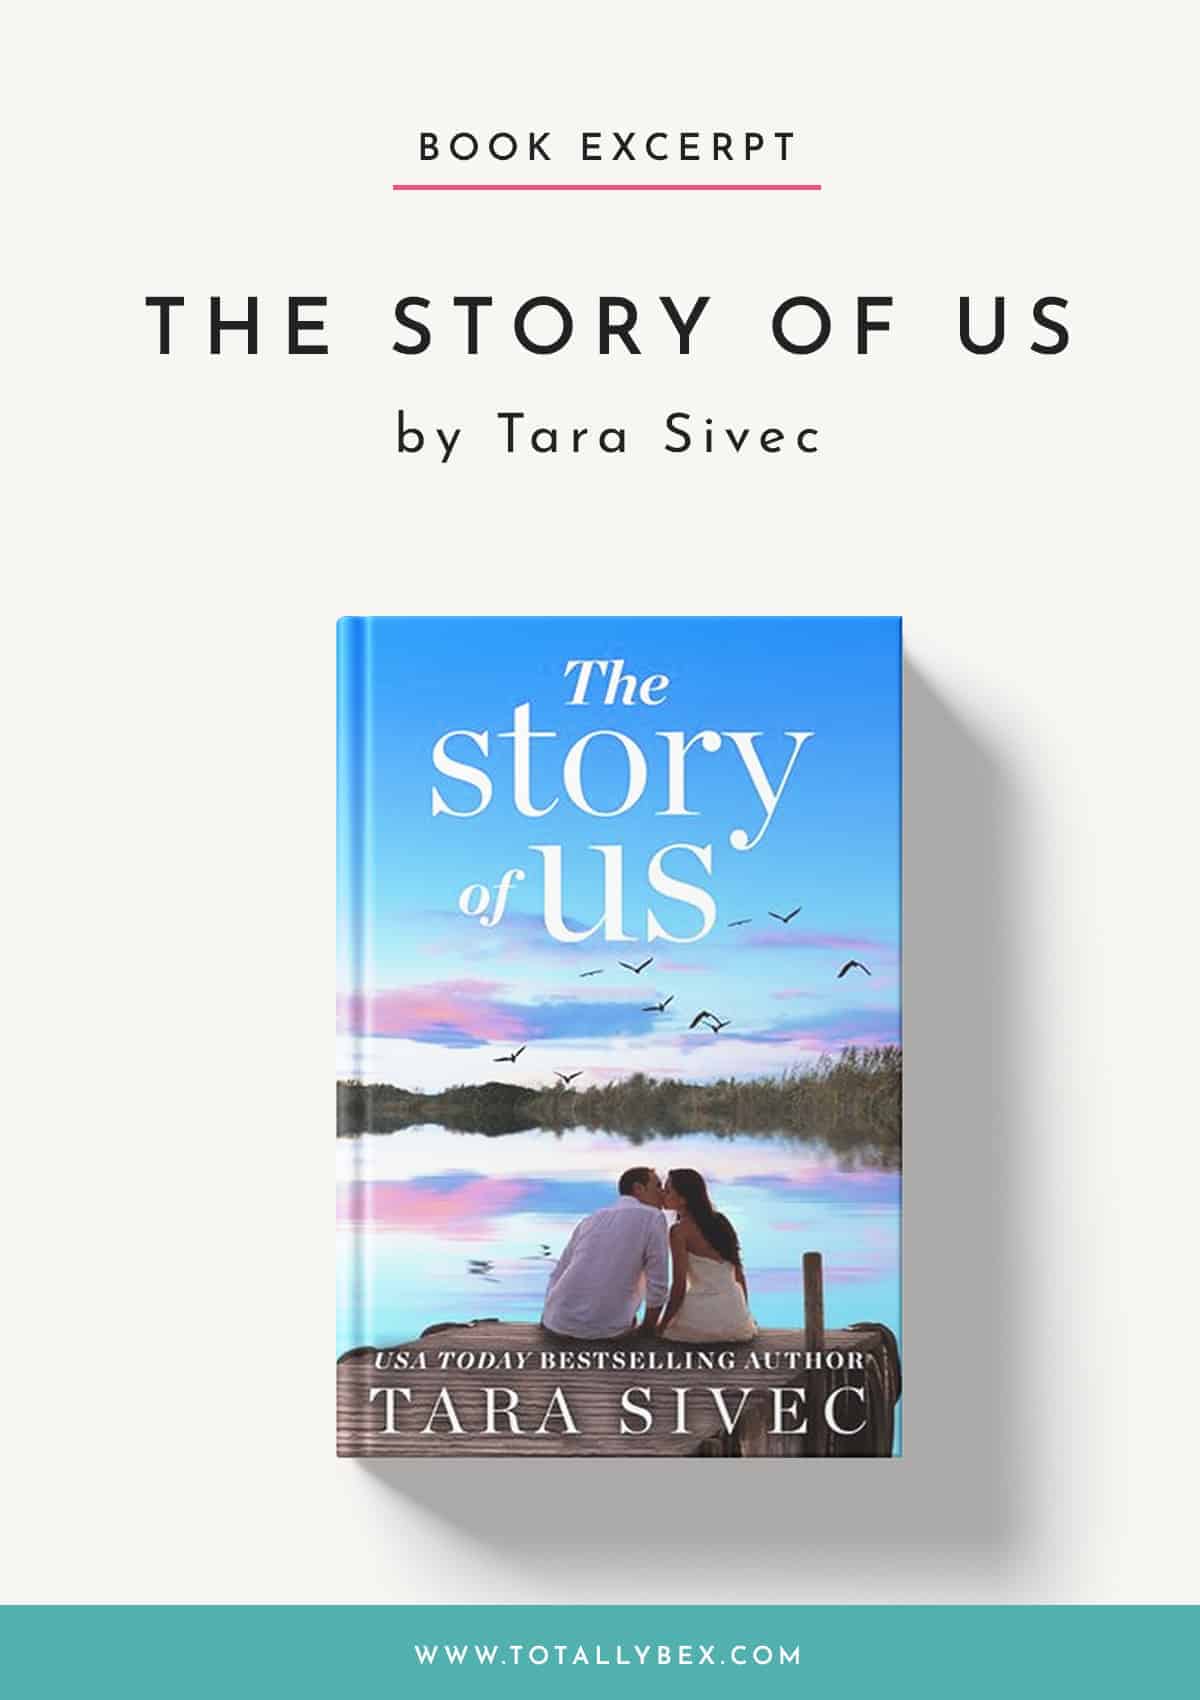 The Story of Us by Tara Sivec – Read a Powerful Excerpt of the Story!